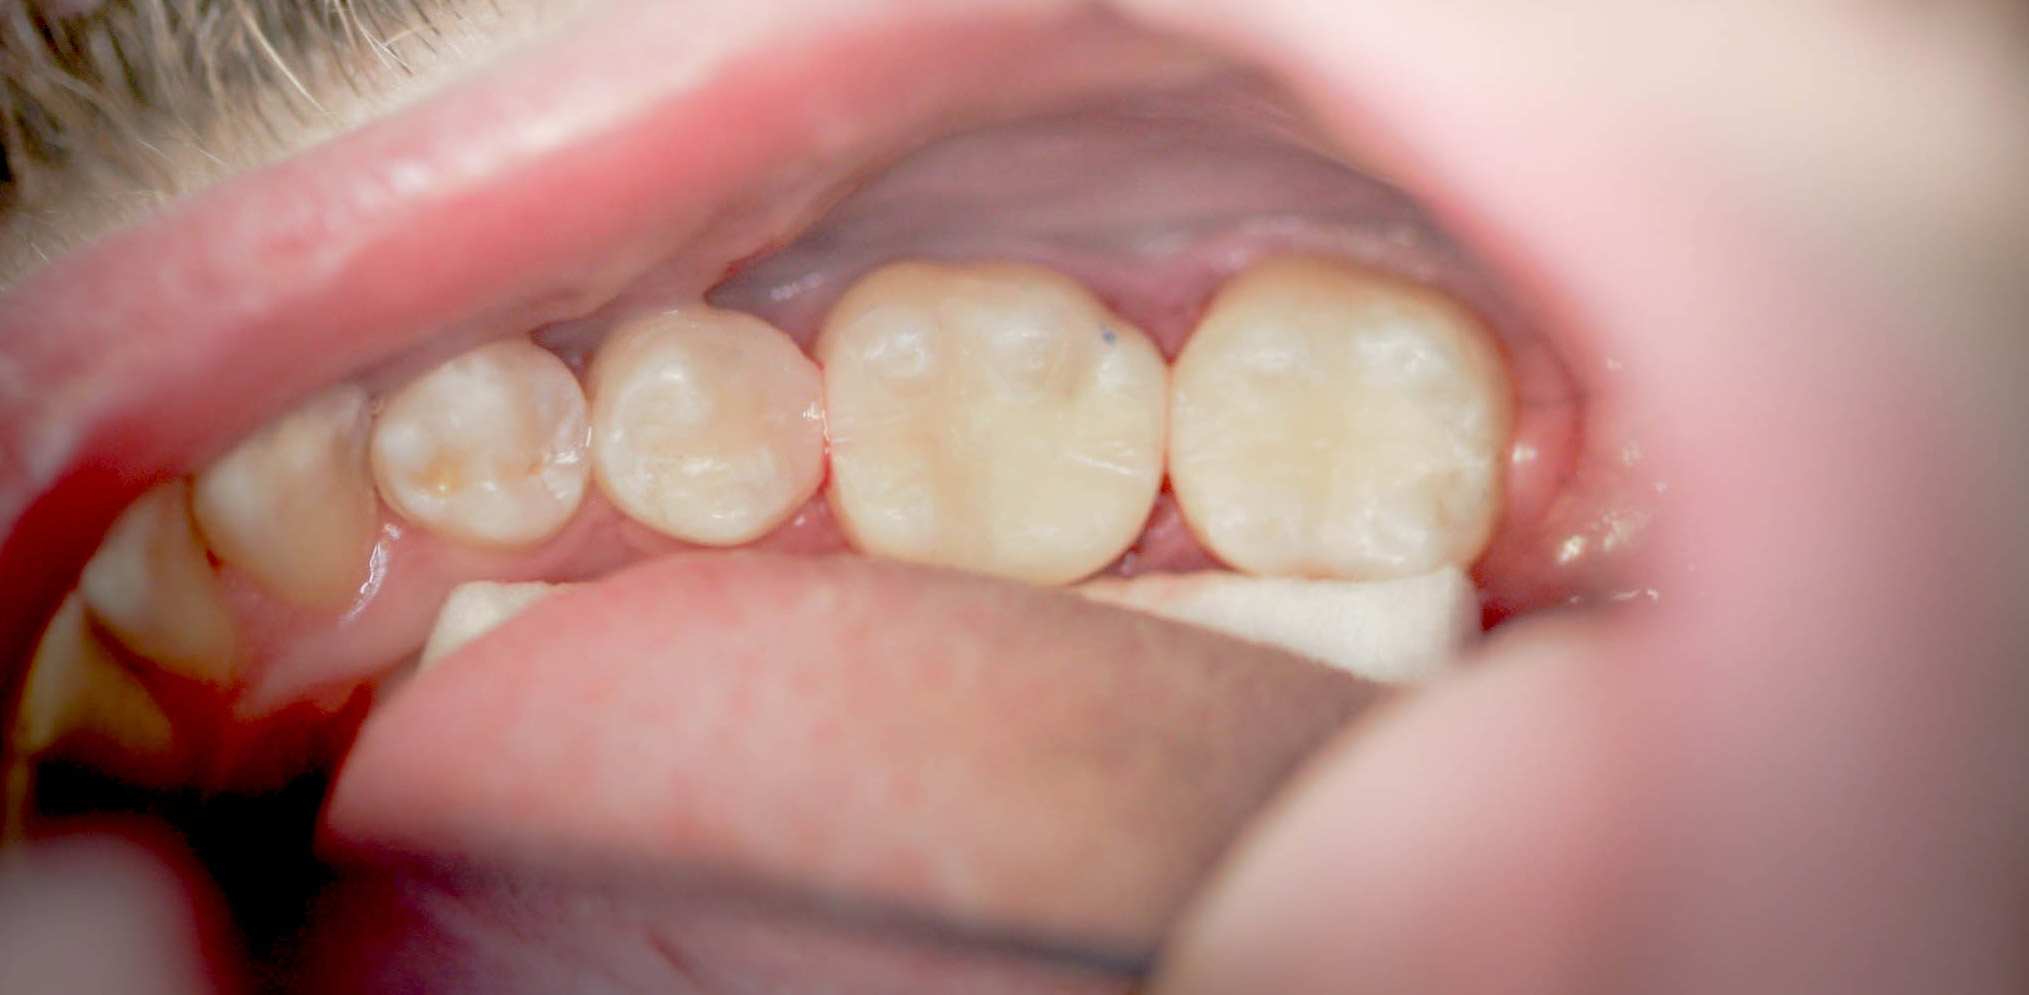 Tooth colored fillings -- the After picture